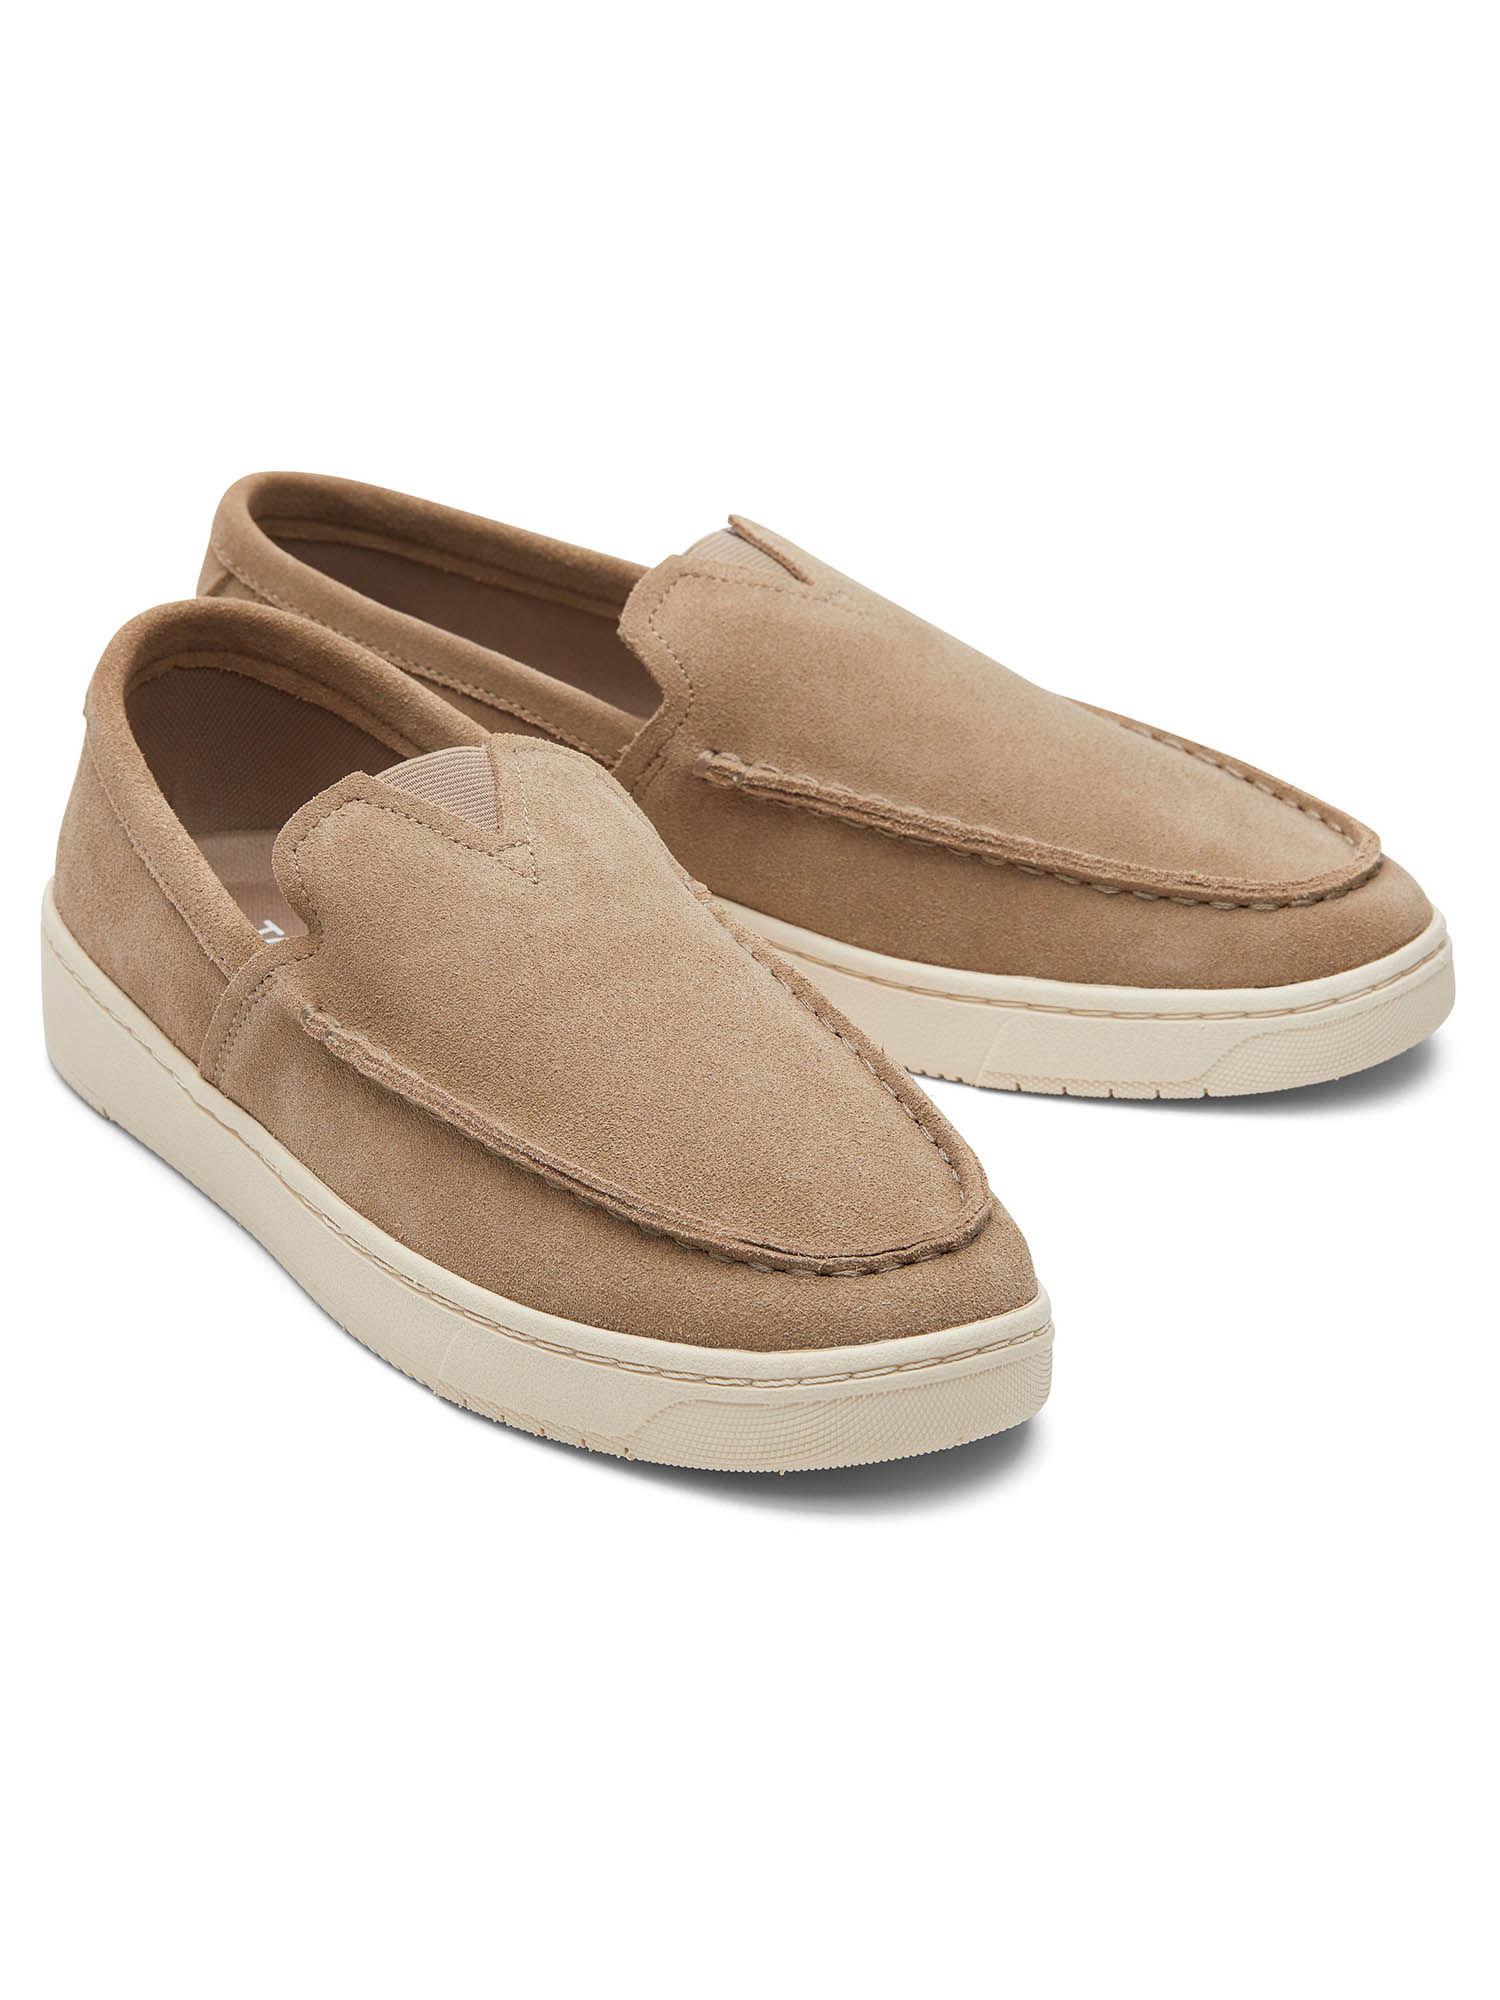 trvl lite suede taupe loafers